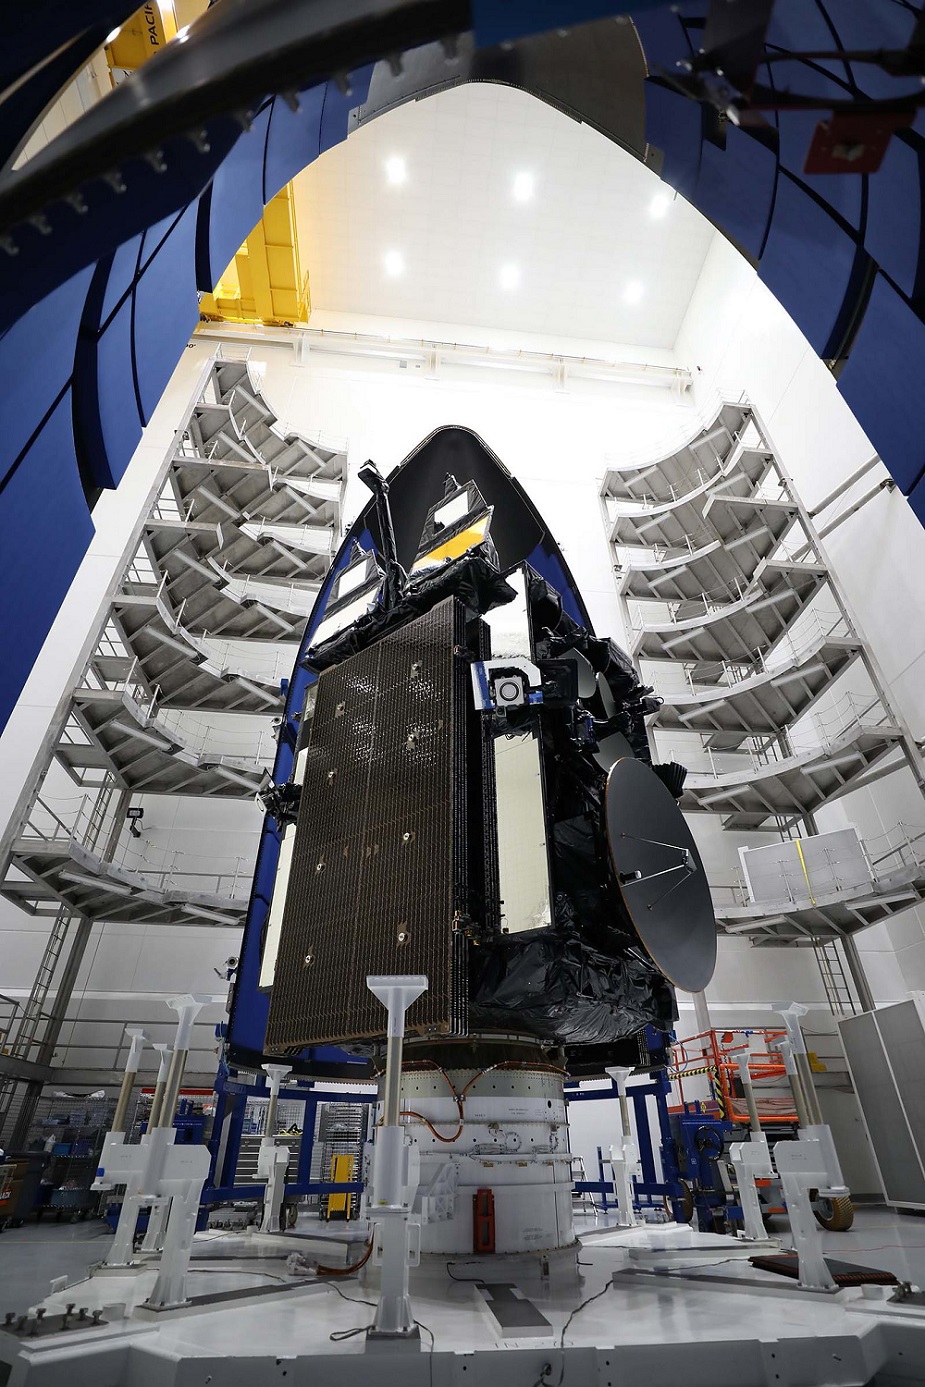 Lockheed Martin Advanced Extremely High Frequency Satellite ready for launch 02